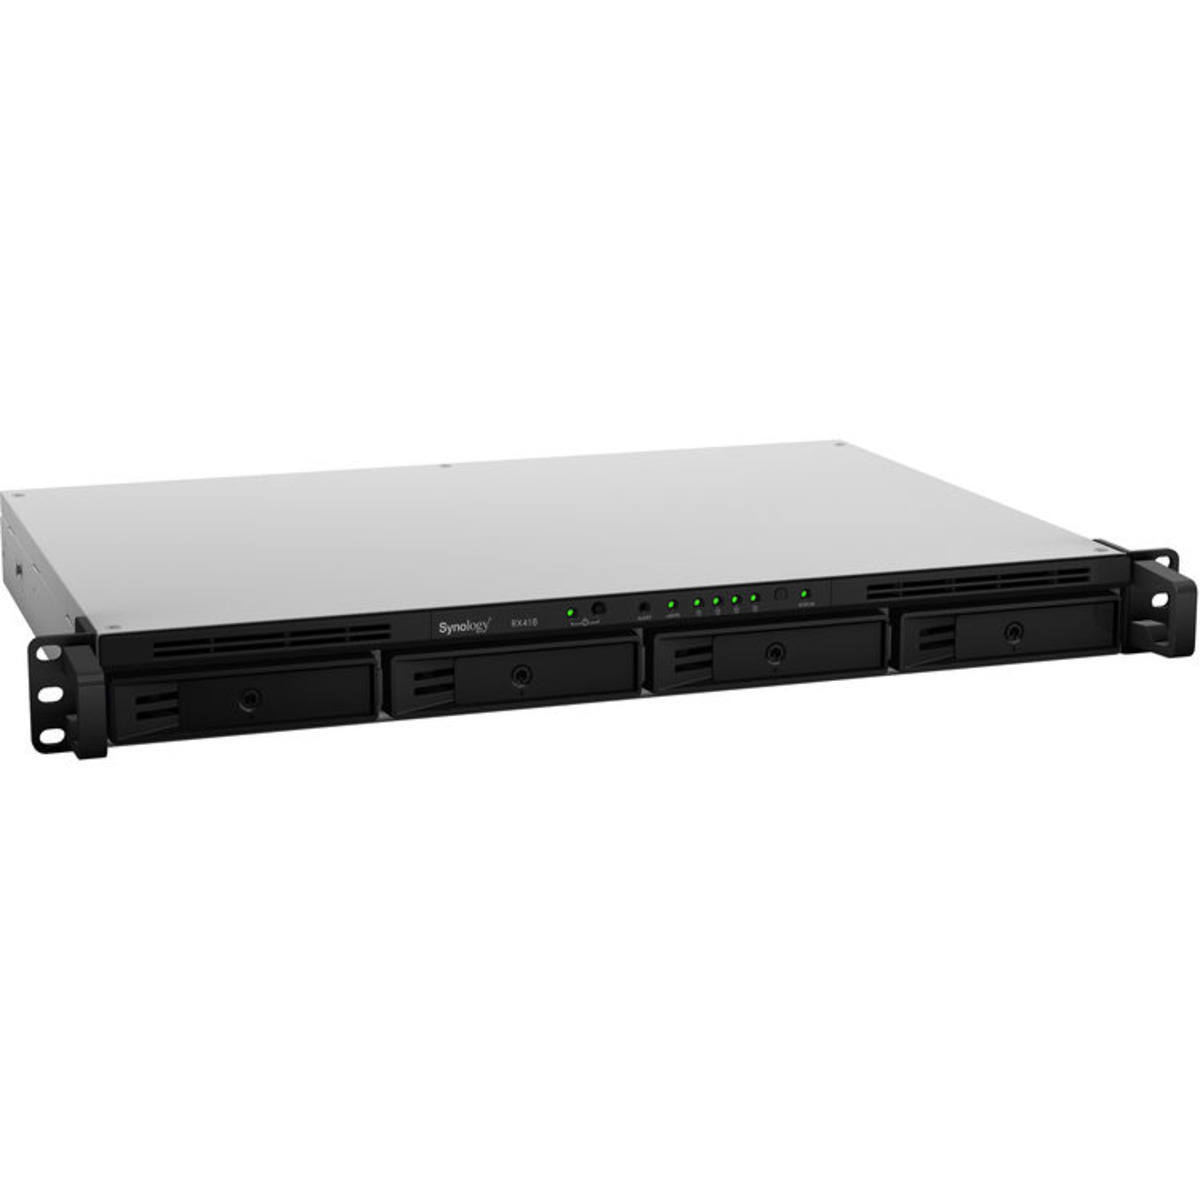 Synology RX418 External Expansion Drive 7.6tb 4-Bay RackMount Multimedia / Power User / Business Expansion Enclosure 2x3.8tb Synology SAT5210 Series SAT5210-3840G 2.5 530/500MB/s SATA 6Gb/s SSD ENTERPRISE Class Drives Installed - Burn-In Tested RX418 External Expansion Drive